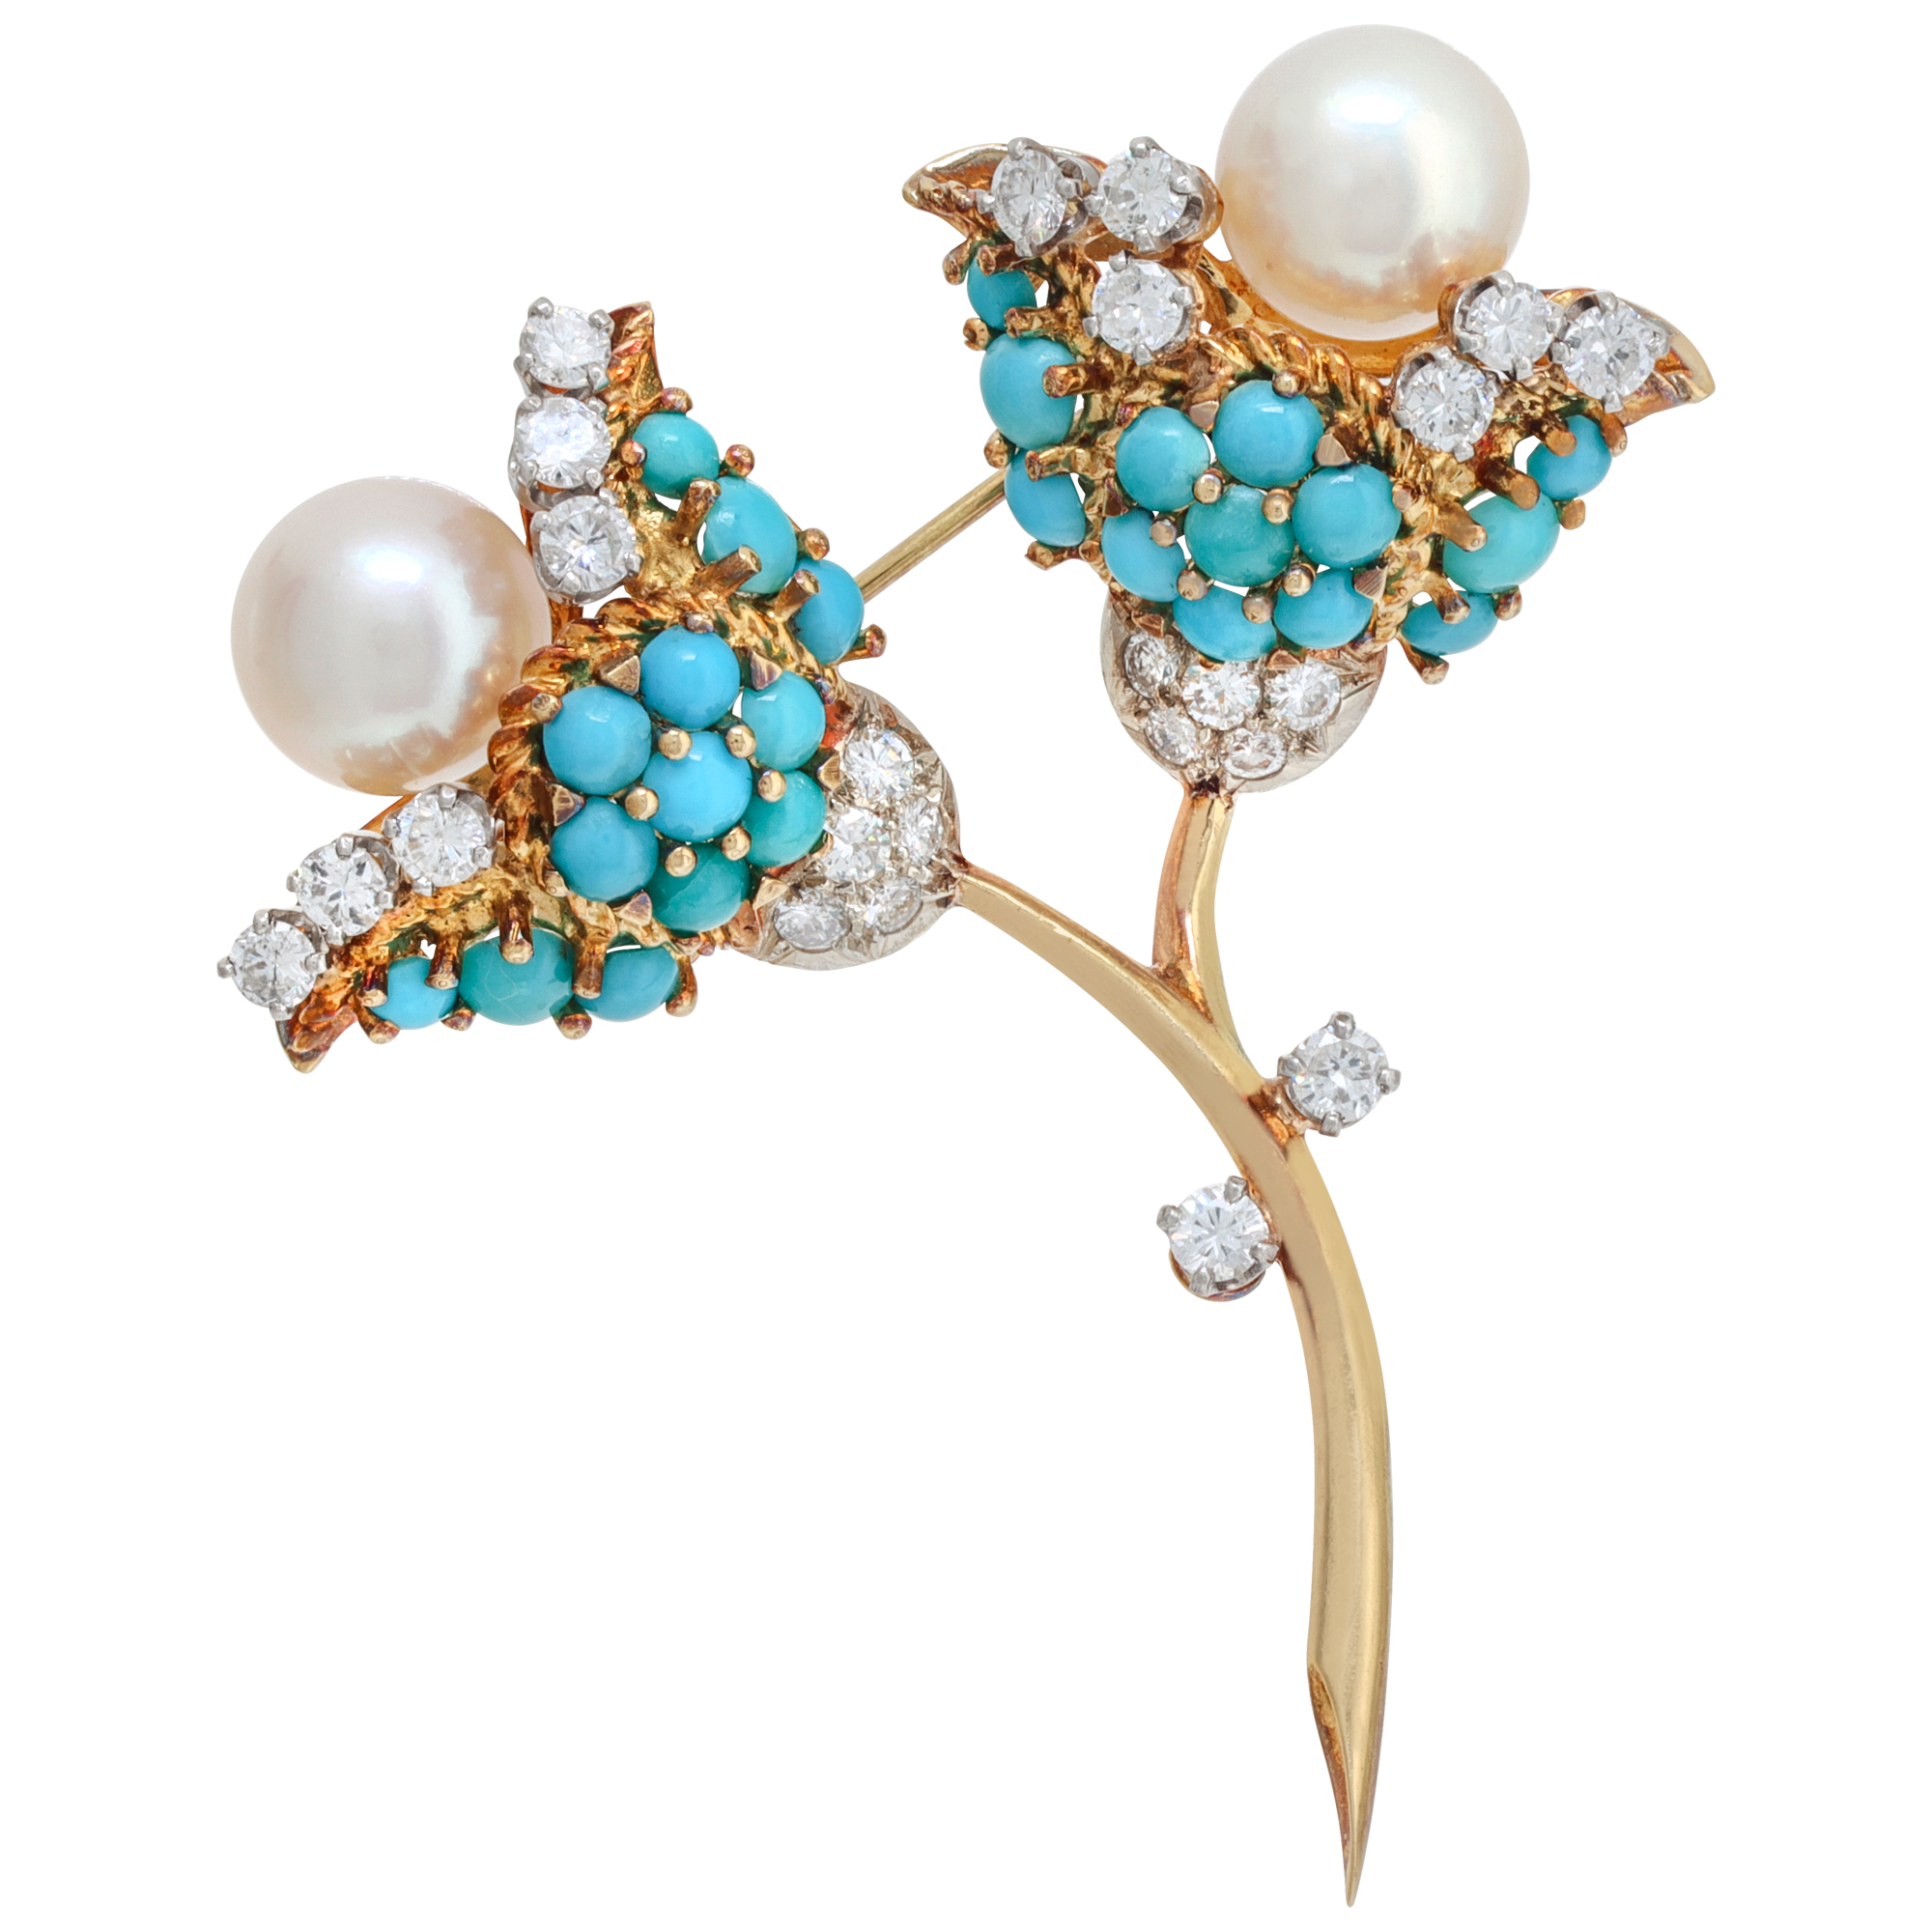 Vintage flower pin with cabochon turquoise, full round brilliant cut diamonds & Akoya pearls (8.5 x 9mm) in 18K yellow gold.